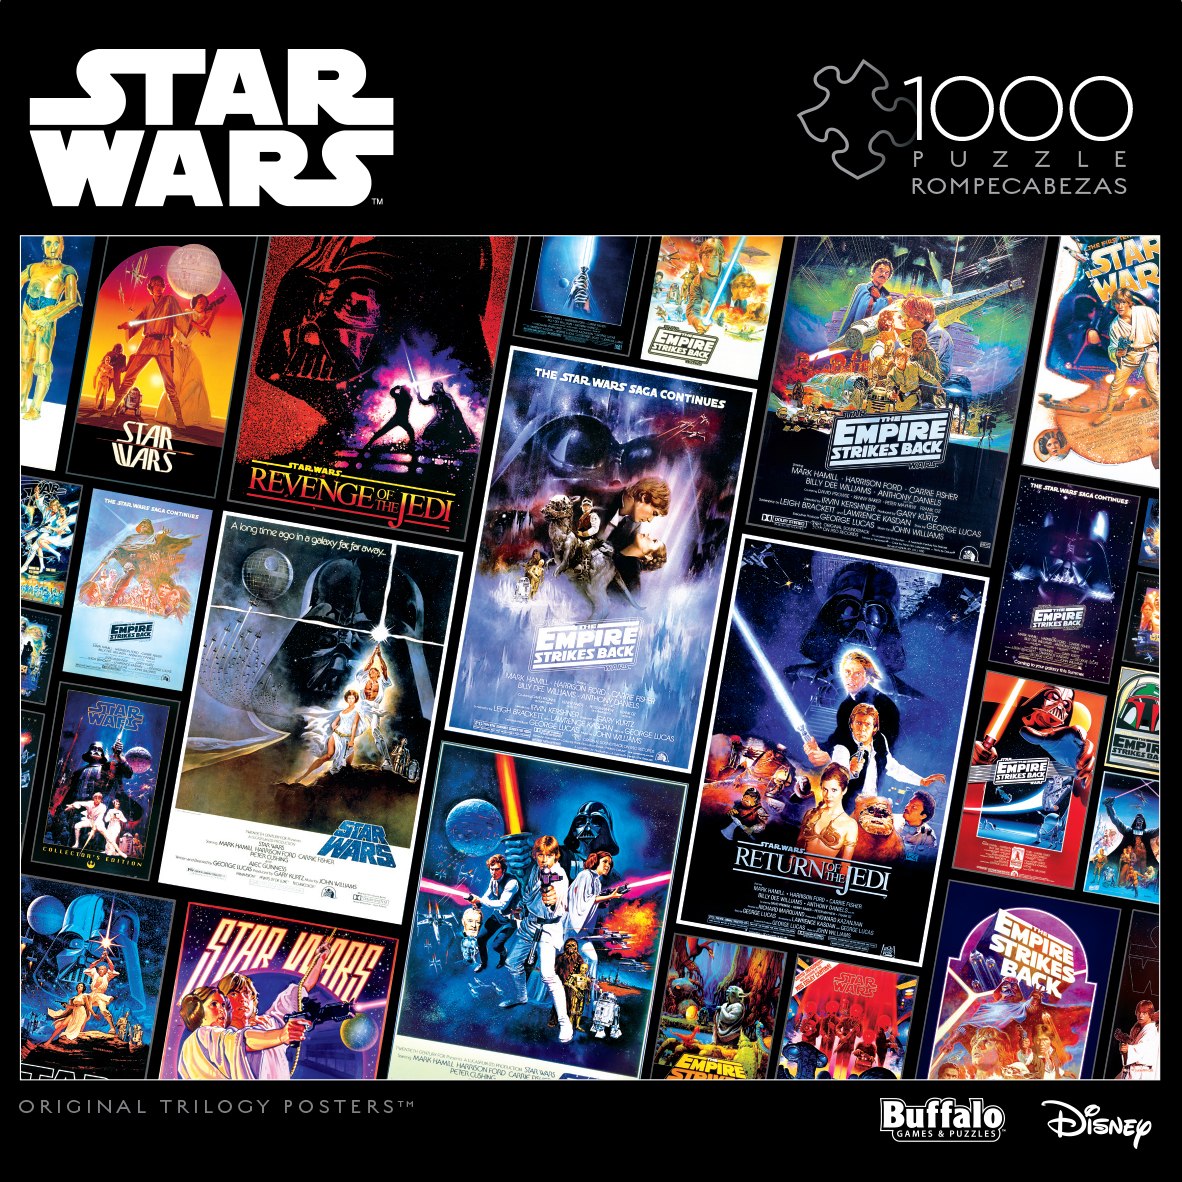 Star Wars: Original Trilogy Posters - 1000pc Jigsaw Puzzle By Buffalo Games - image 1